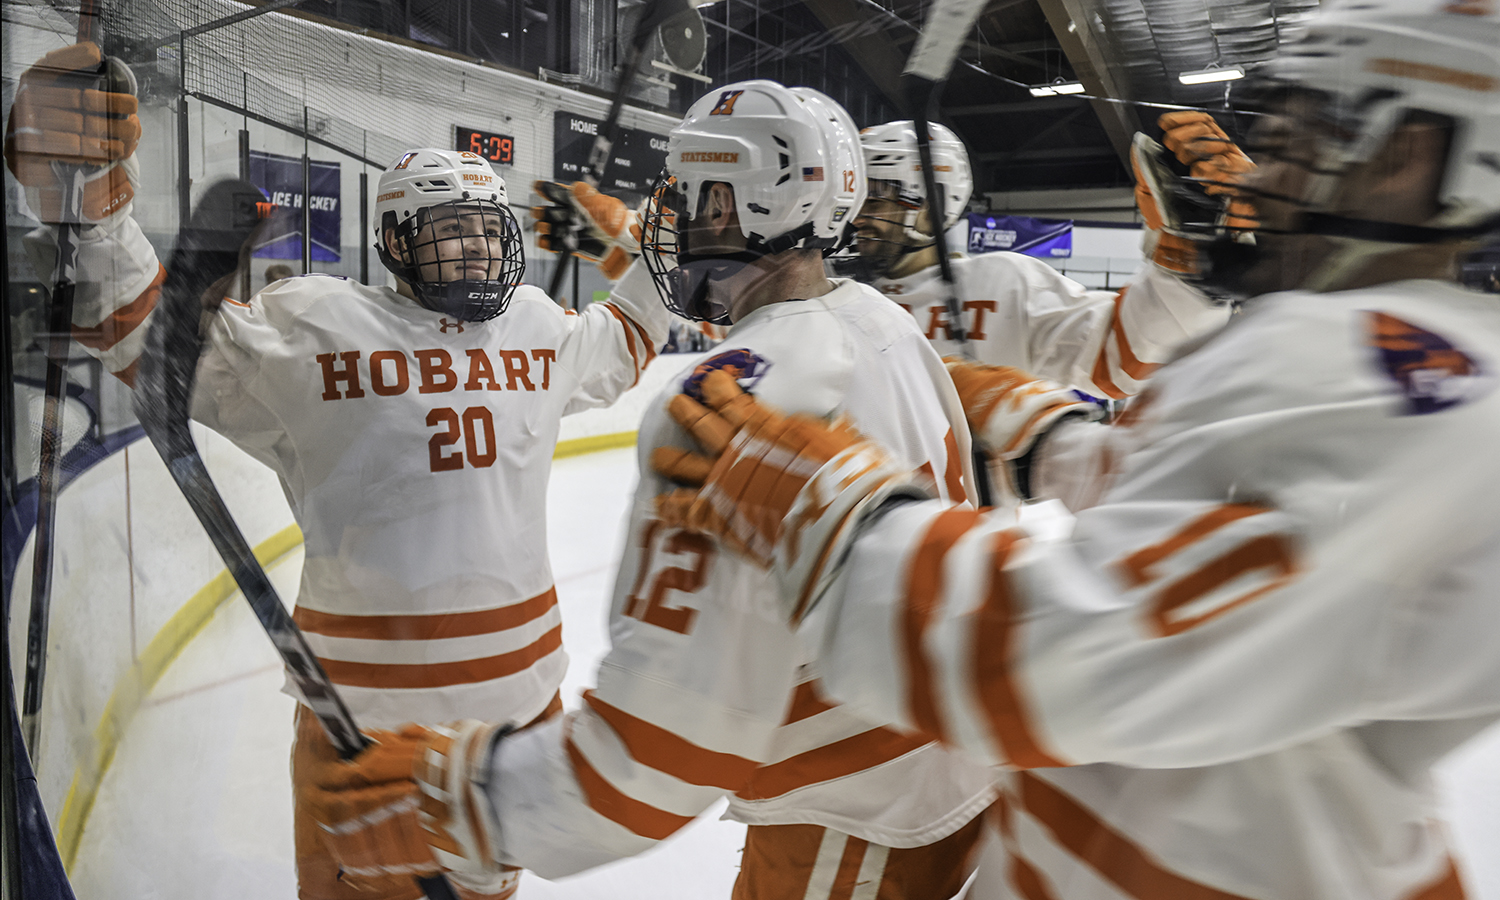  In this special edition of This Week in Photos, all taken by Chief Photographer Kevin Colton, we applaud Hobart Hockey, ranked the Number 1 team in the nation. Here, the team gathers to celebrate Shane Shell’s ’25 overtime game-winner against Salve Regina. The win improved Hobart to 13-0-0 on the season.